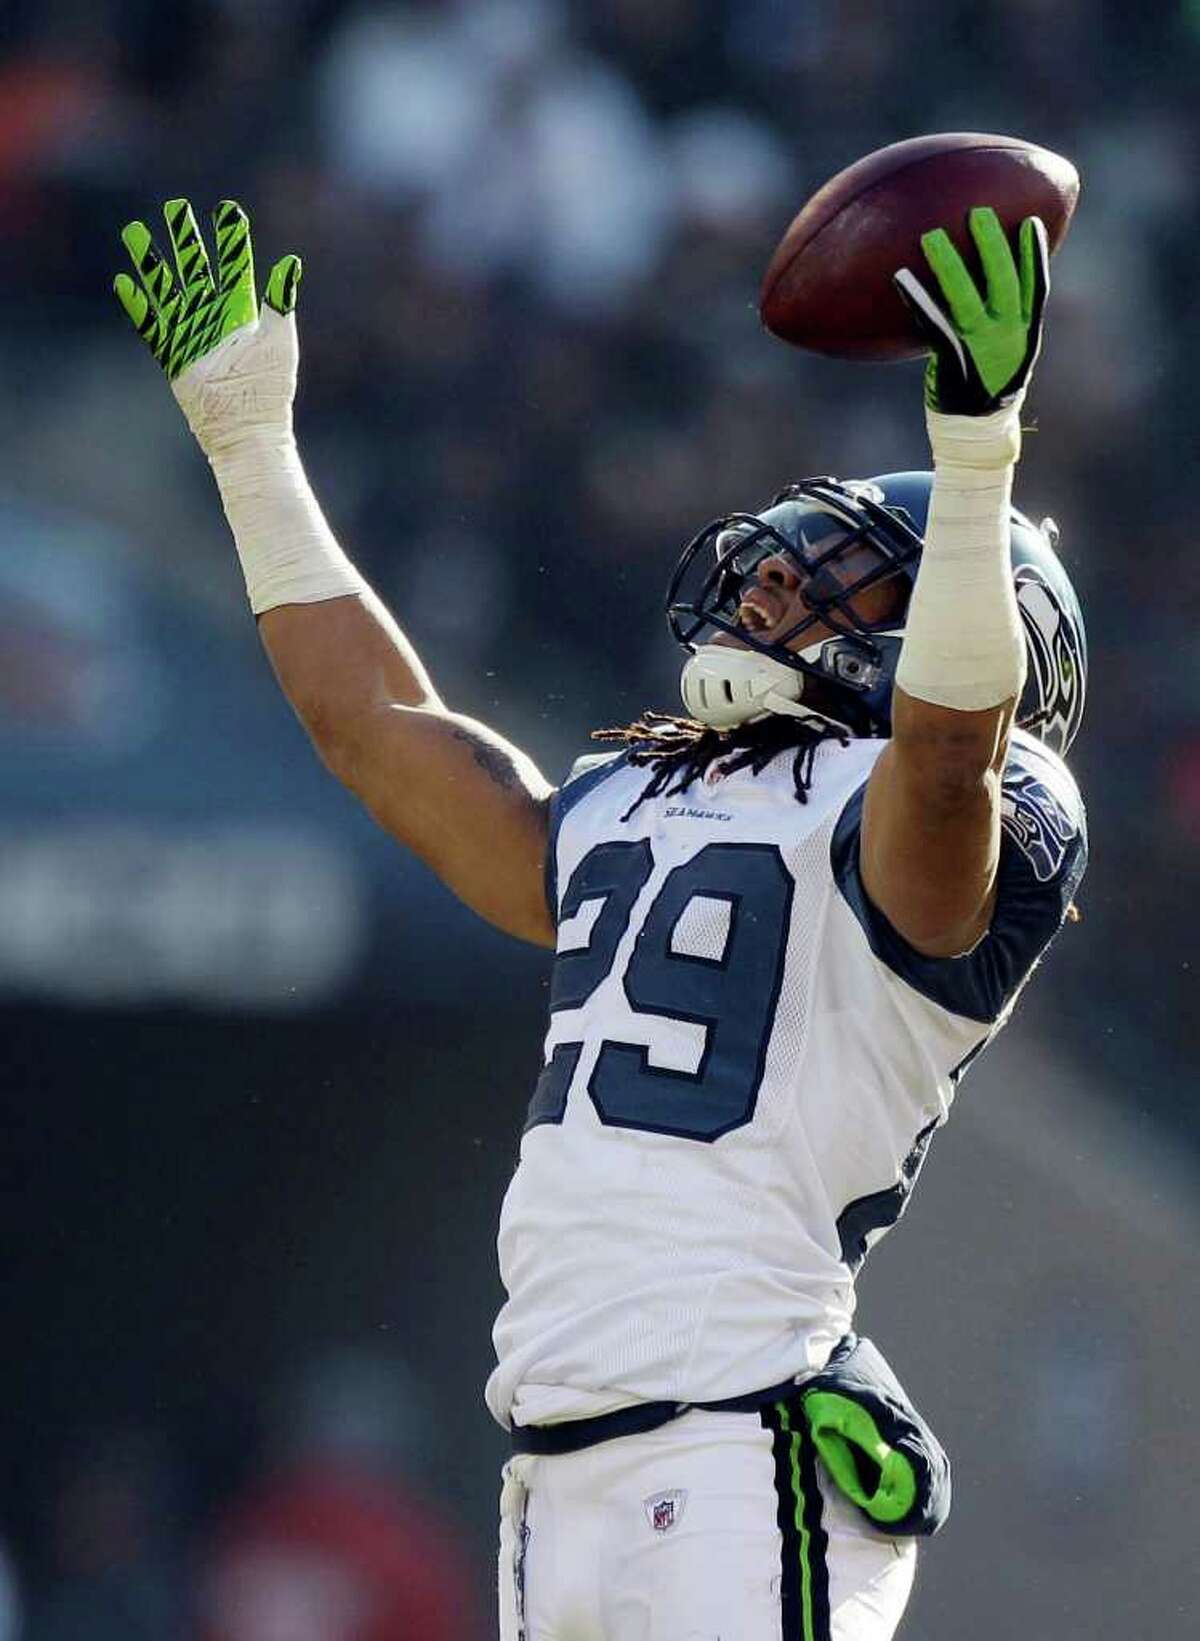 Seattle Seahawks safety Earl Thomas (29) reacts after recovering a fumble by Chicago Bears wide receiver Johnny Knox (13) in the first half of an NFL football game in Chicago, Sunday, Dec. 18, 2011. Knox was injured on the play. (AP Photo/Nam Y. Huh)